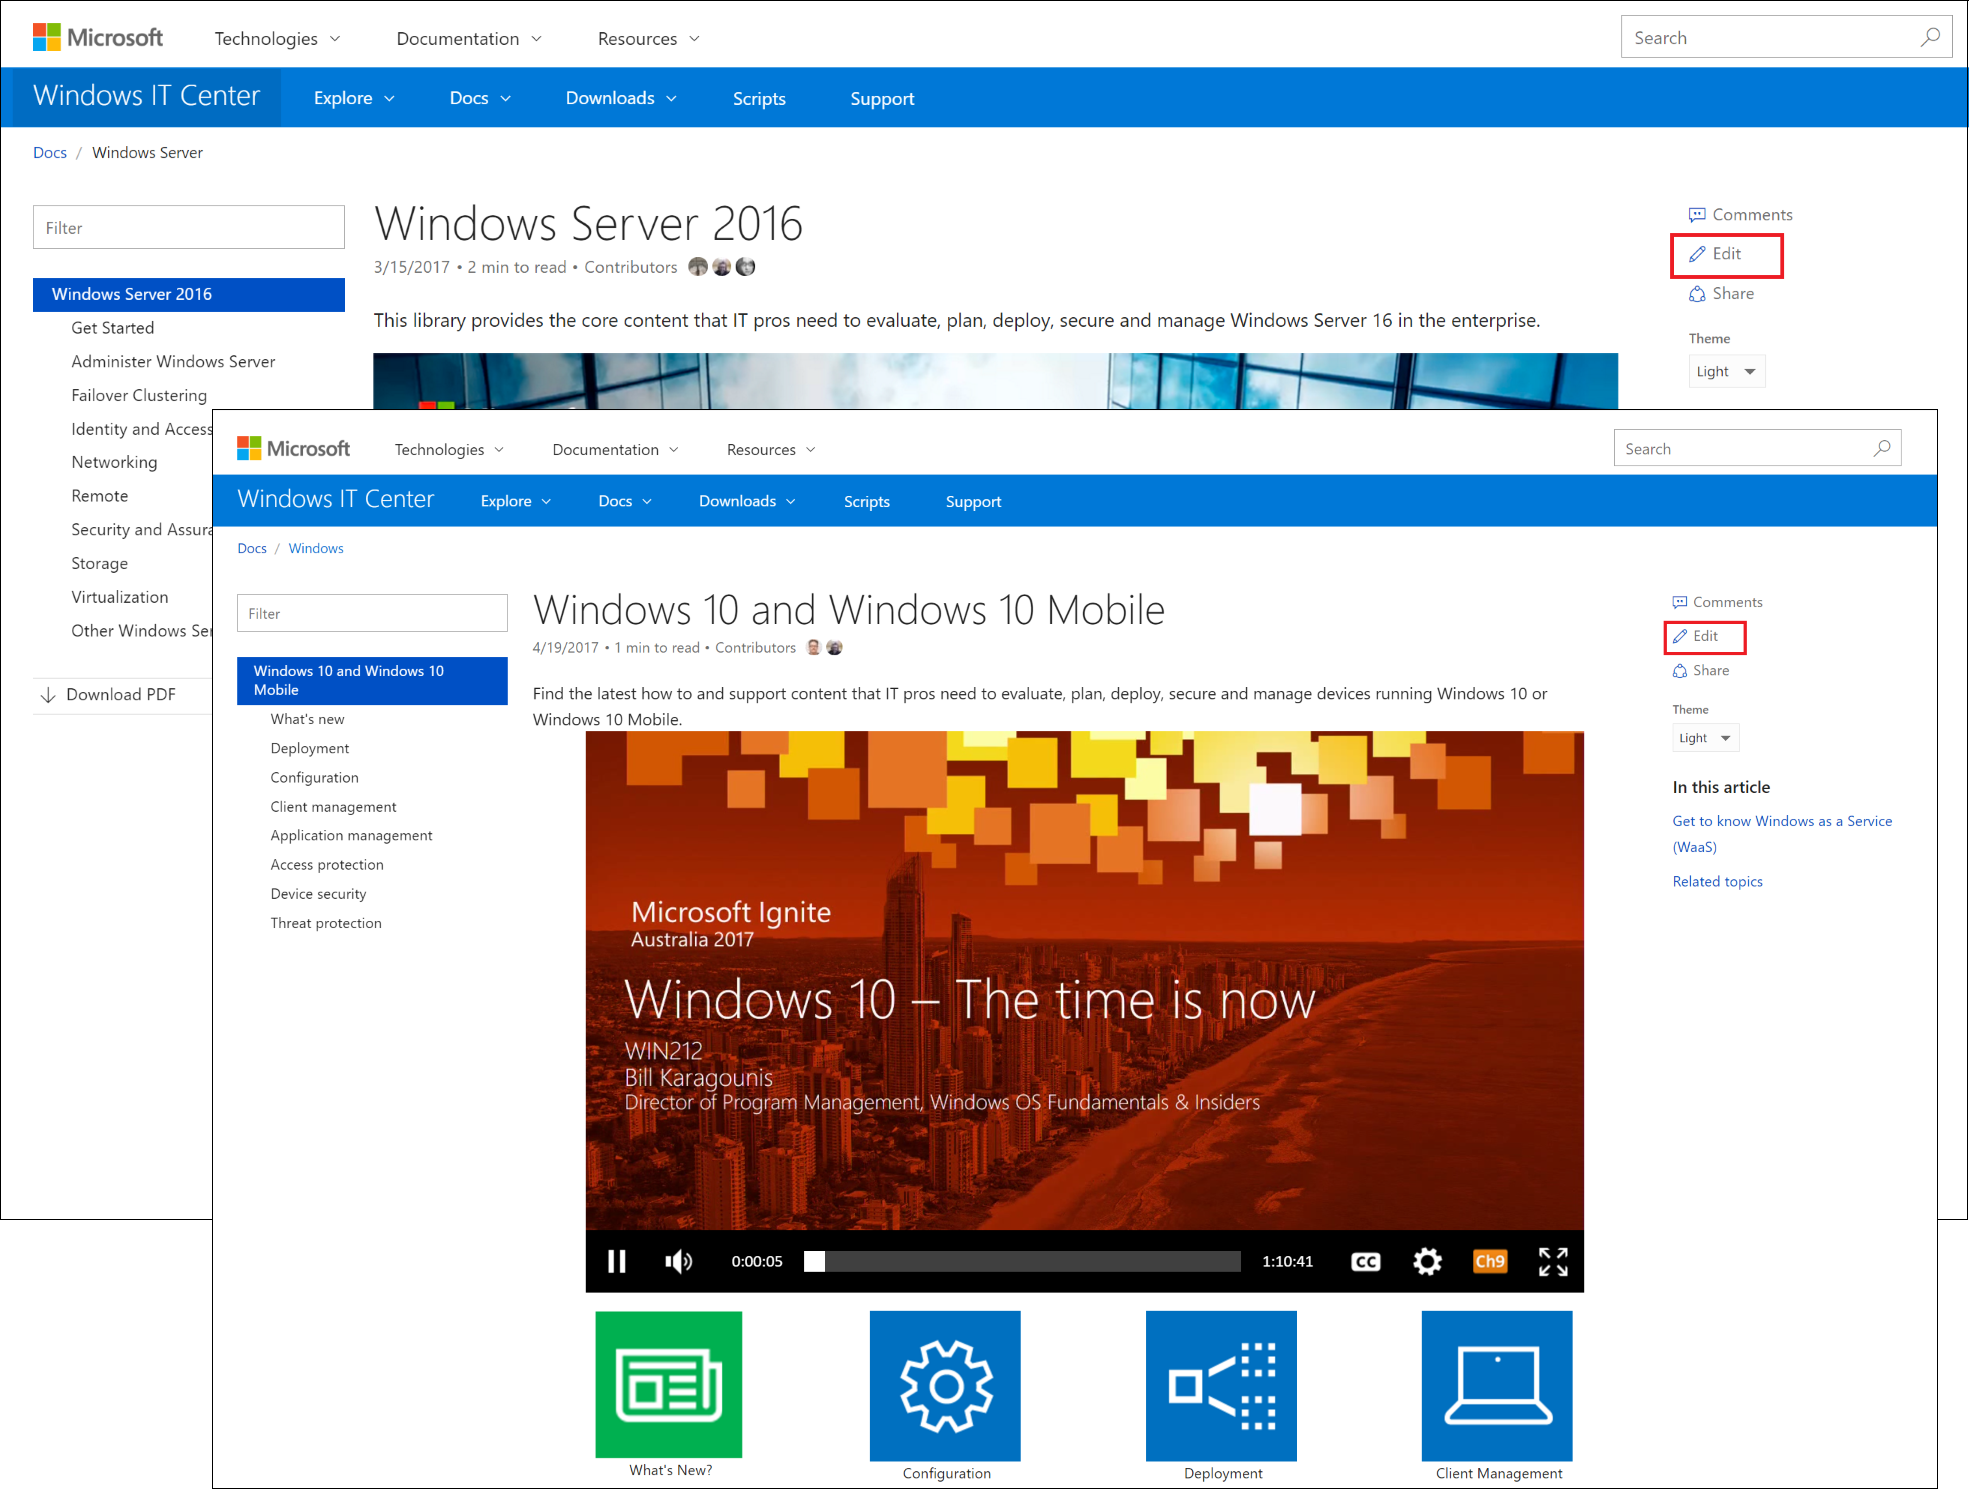 Windows 10 and Windows 10 Mobile and Windows Server 2016 landing pages on docs.microsoft.com